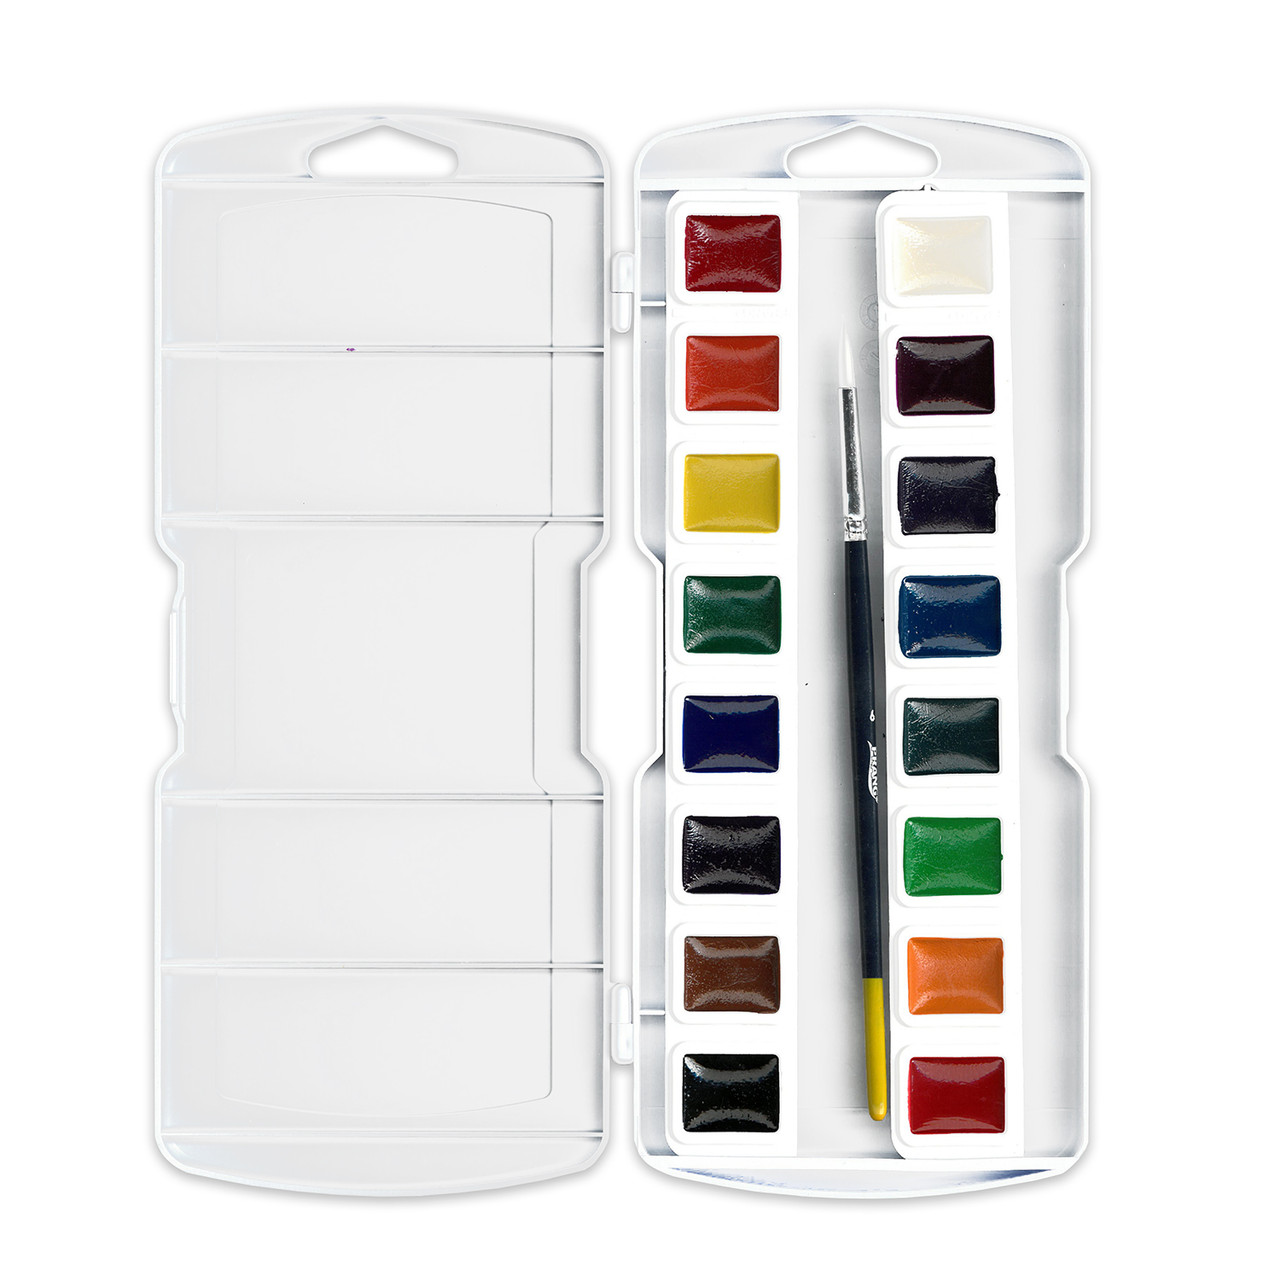 Handmade Watercolor kit -RAFTER kit includes 6 half pans -tin and